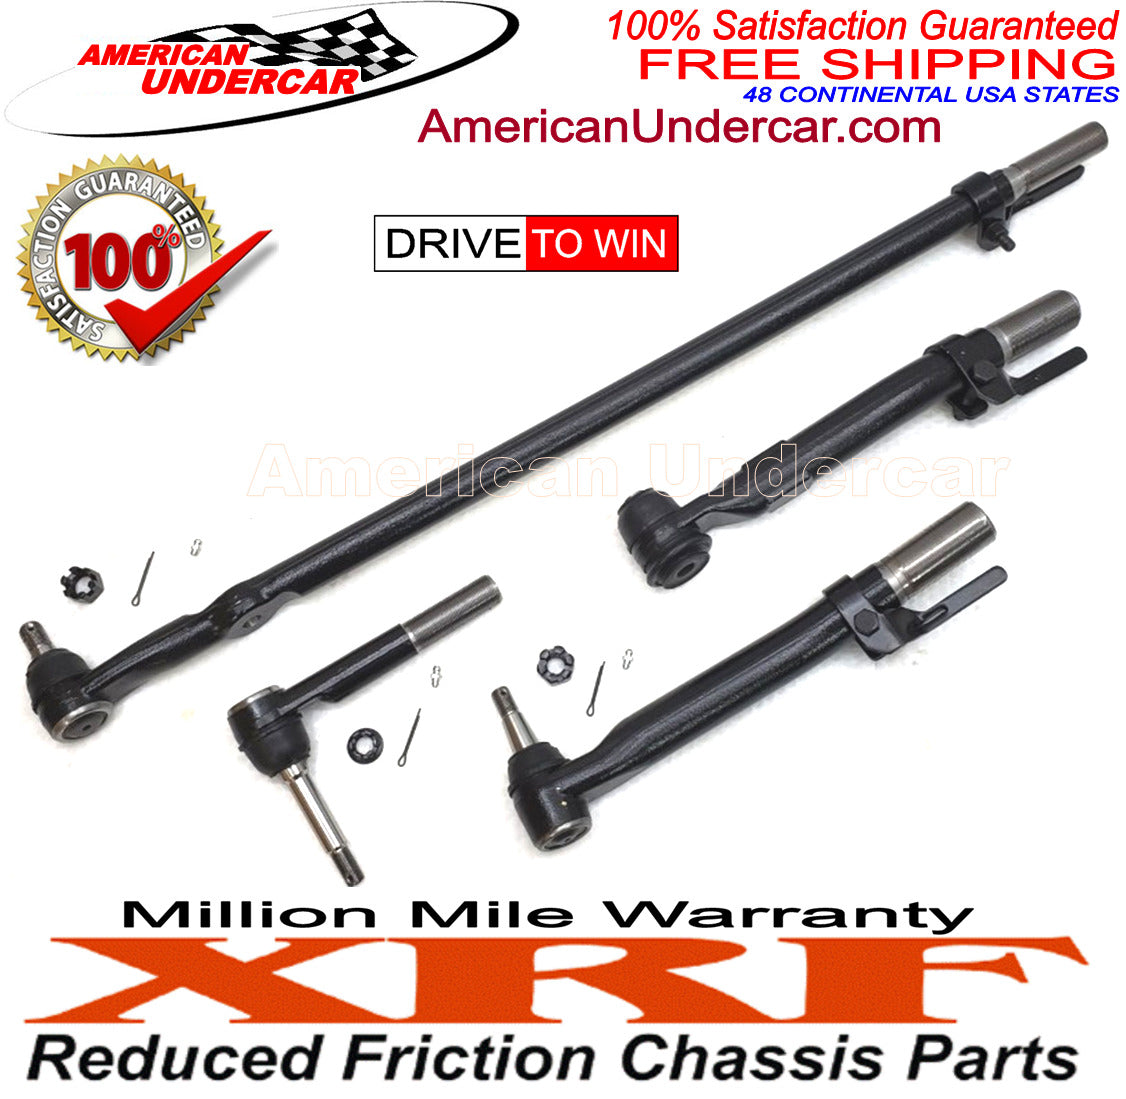 XRF Ford F350 Super Duty NARROW AXLE Steering and Suspension Kit 2017 - 2022 4x4